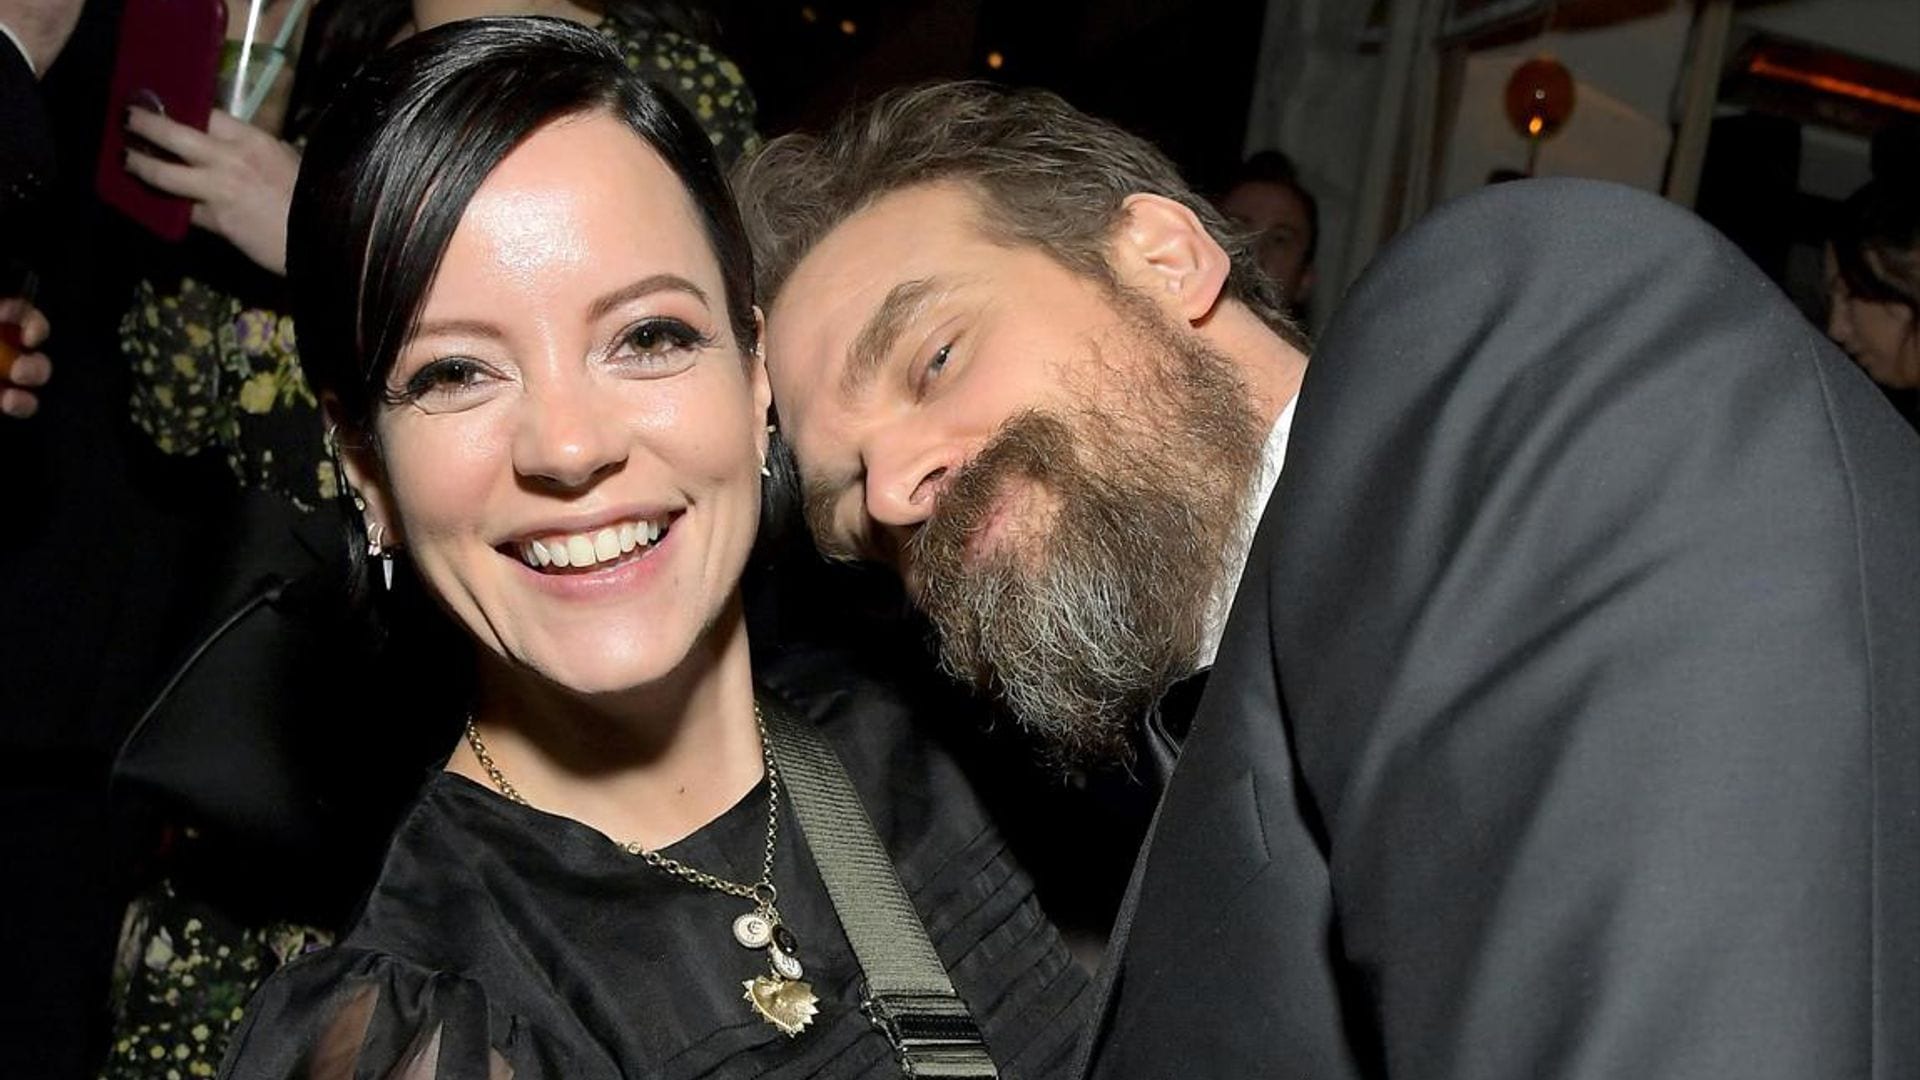 Lily Allen and David Harbour celebrate their wedding in true Las Vegas style